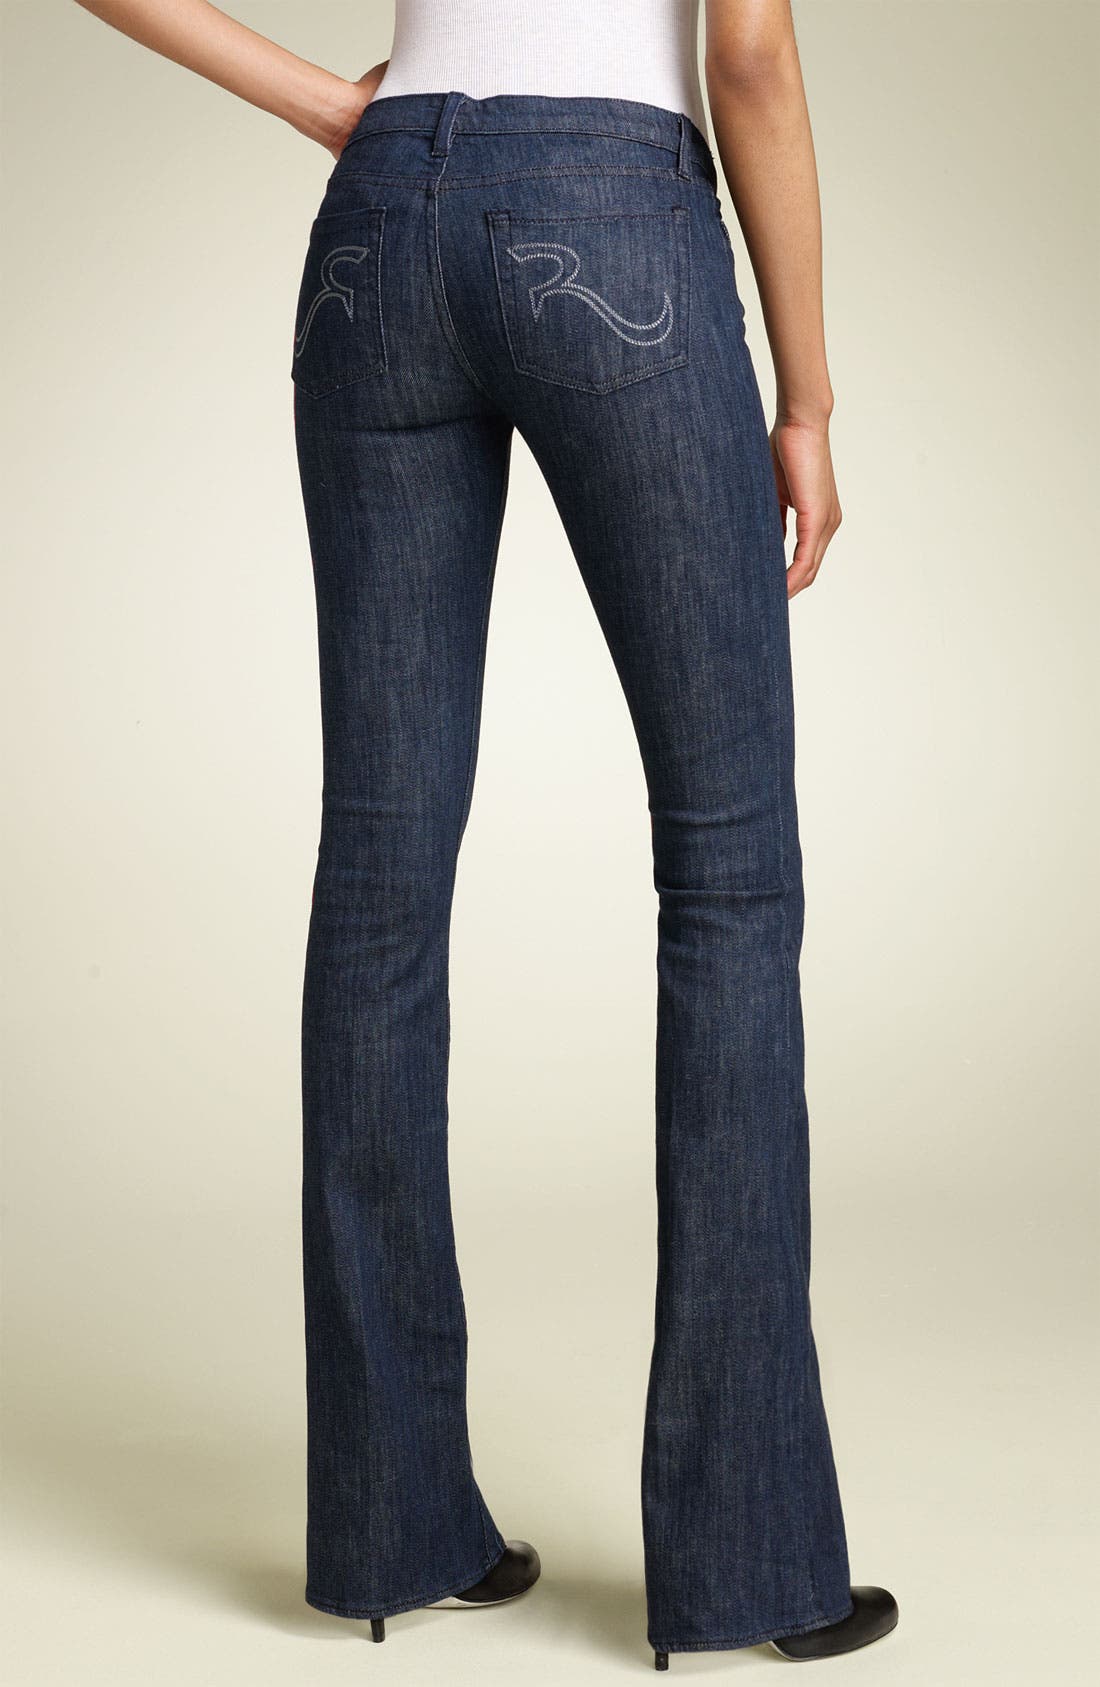 rock and republic jeans nordstrom